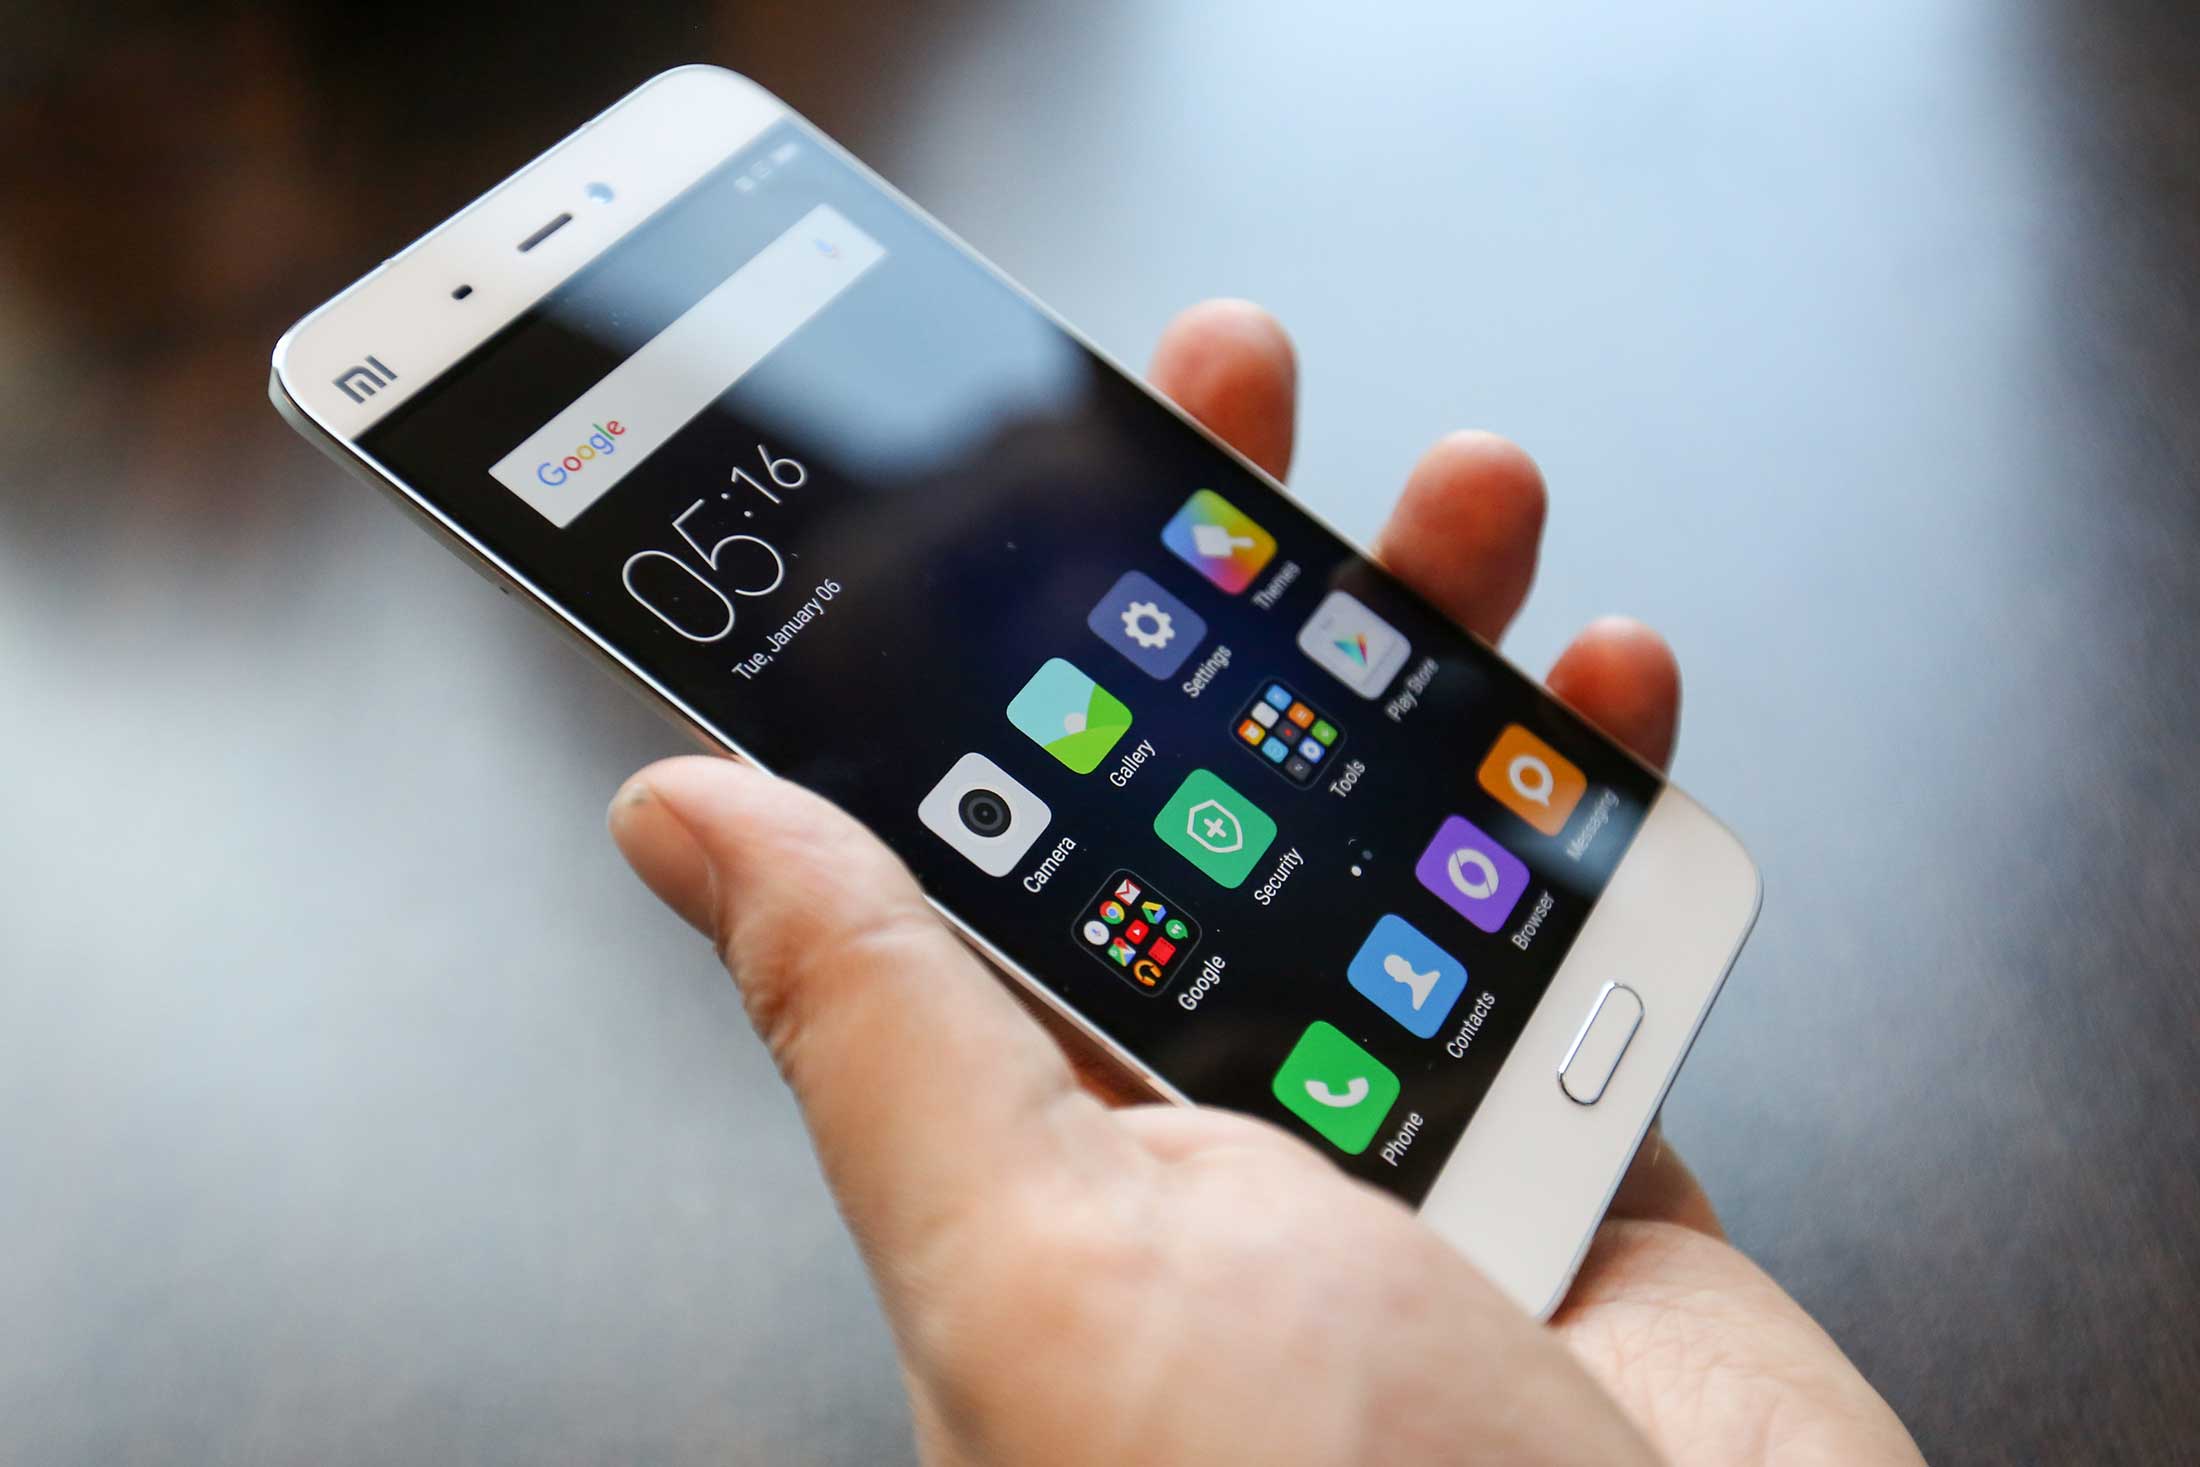 An attendee handles the Mi5 smartphone, manufactured by Xiaomi Corp.
